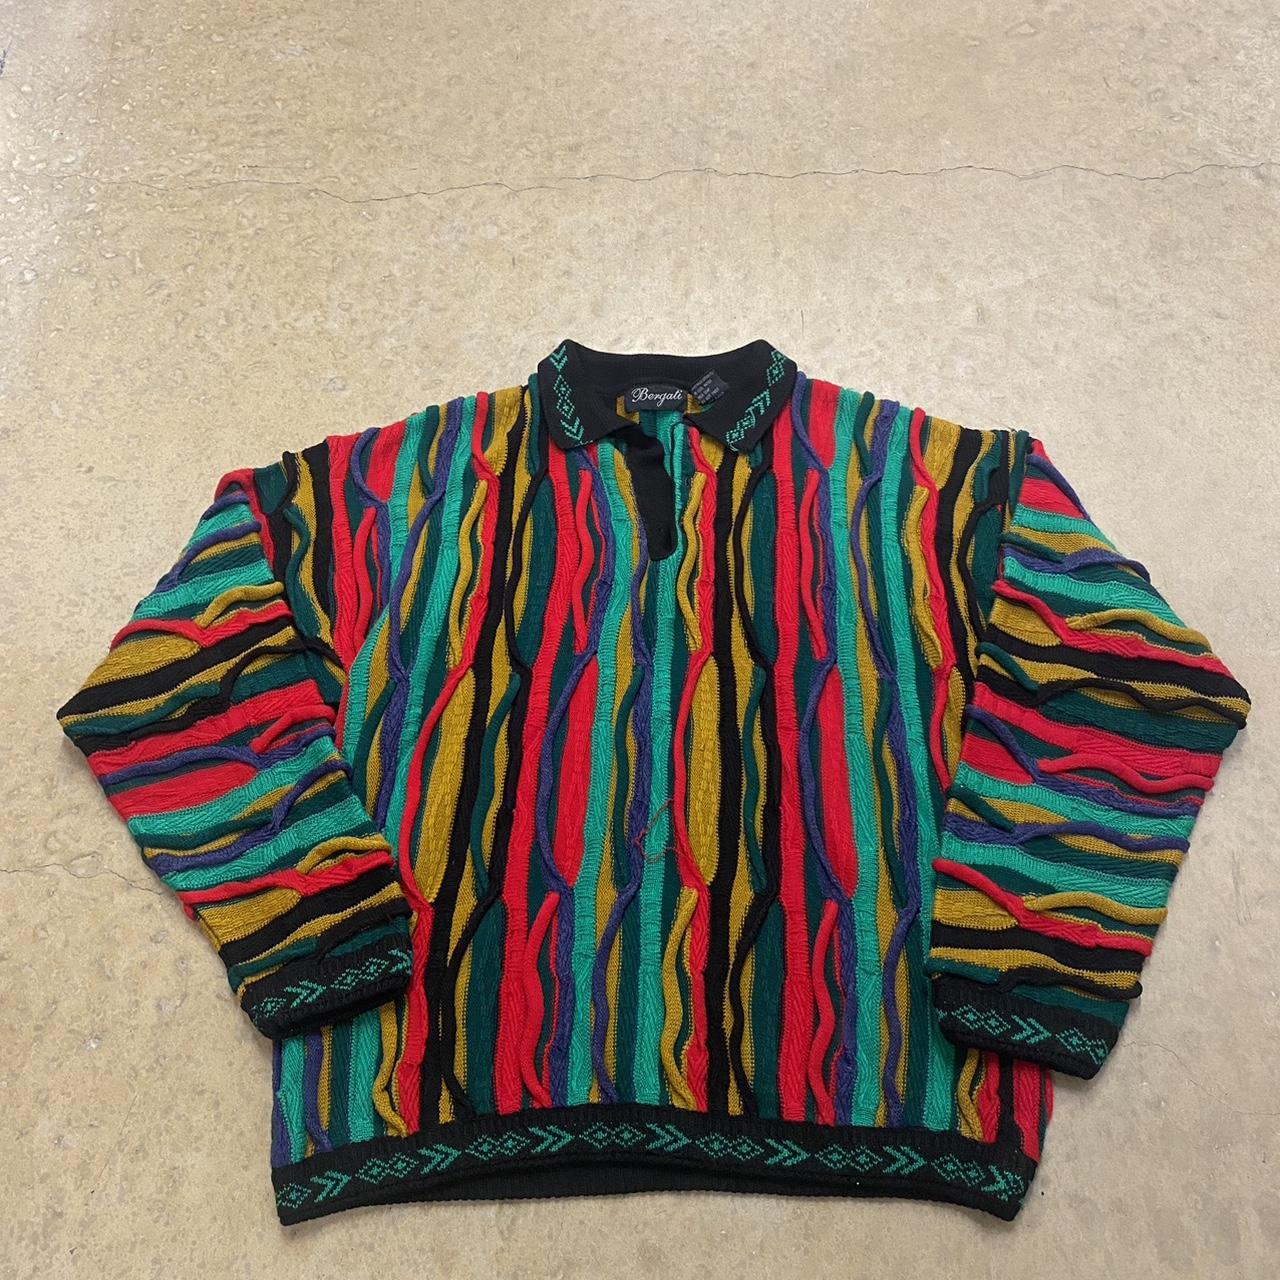 3d knitted sweater coogi look alike size large just... - Depop